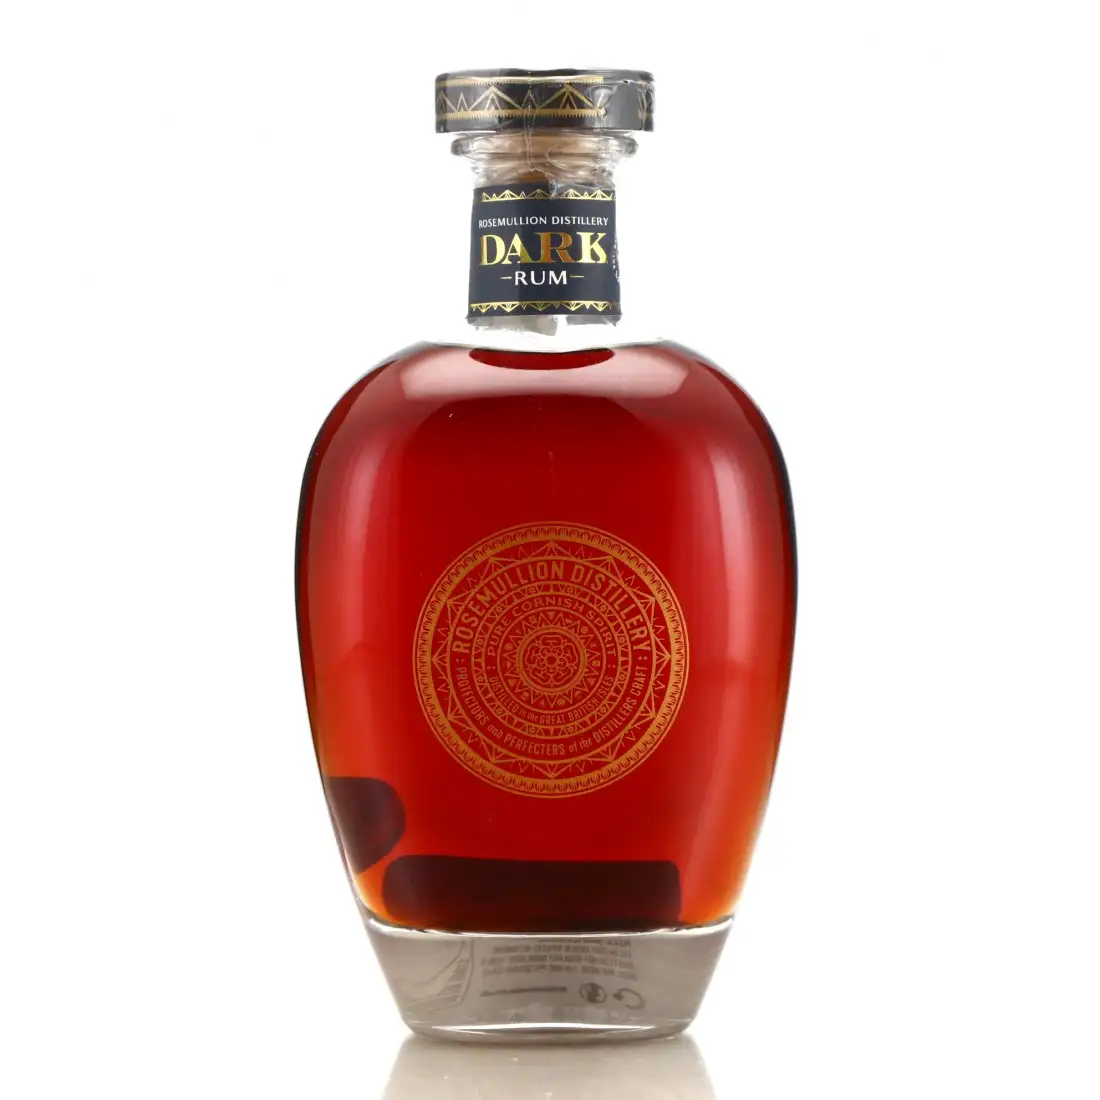 Image of the front of the bottle of the rum Dark Rum